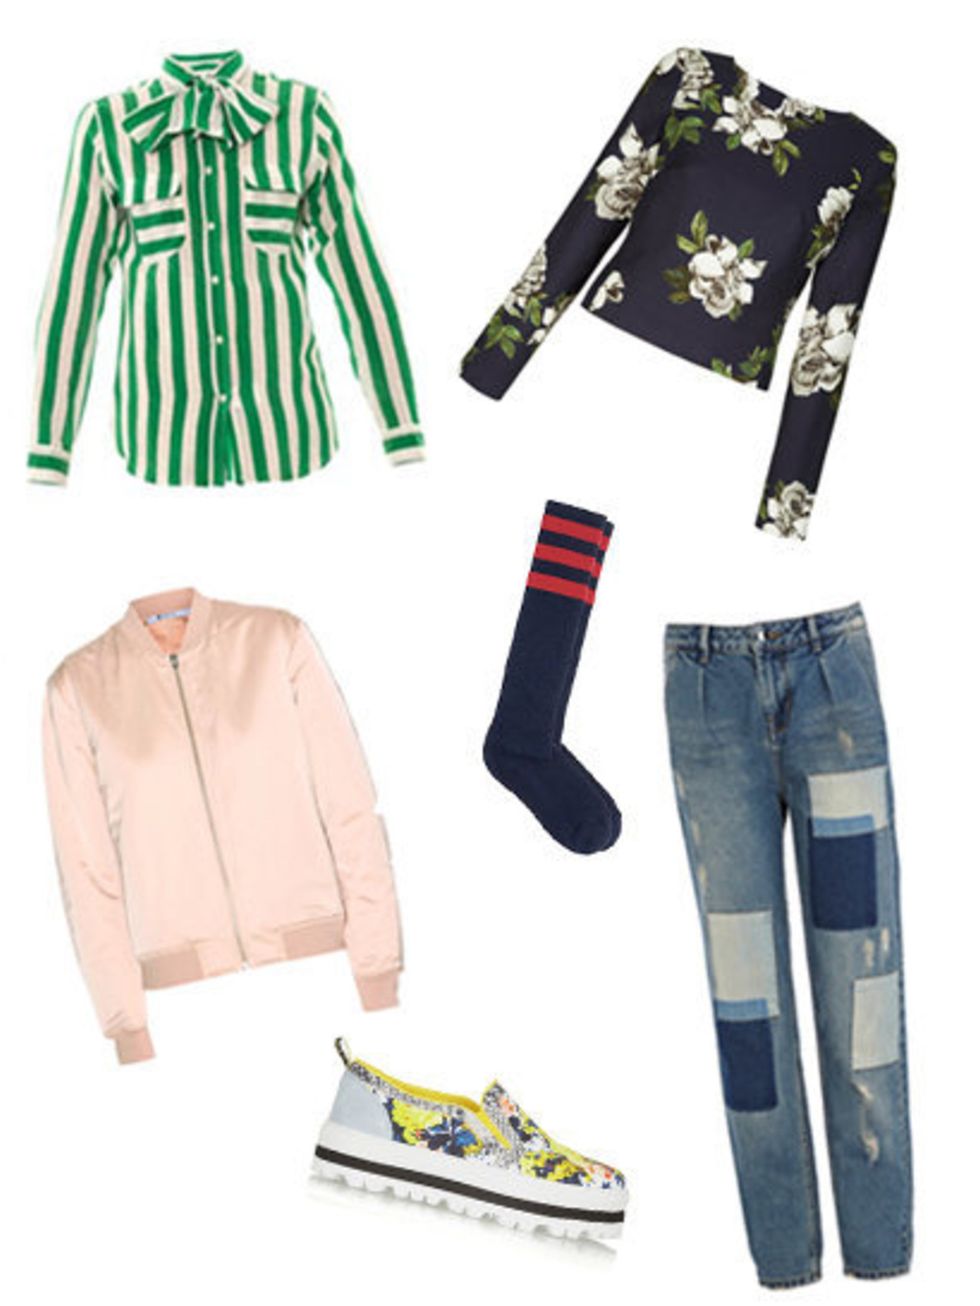 <p>The shops are awash with the first Spring drops but how do you tap into those new trends now before the mercury rises?</p><p>Swap boots for brogues, layer a skinny-polo-neck under silky fabrics, or, for the sartorially brave, try a brightly coloured an